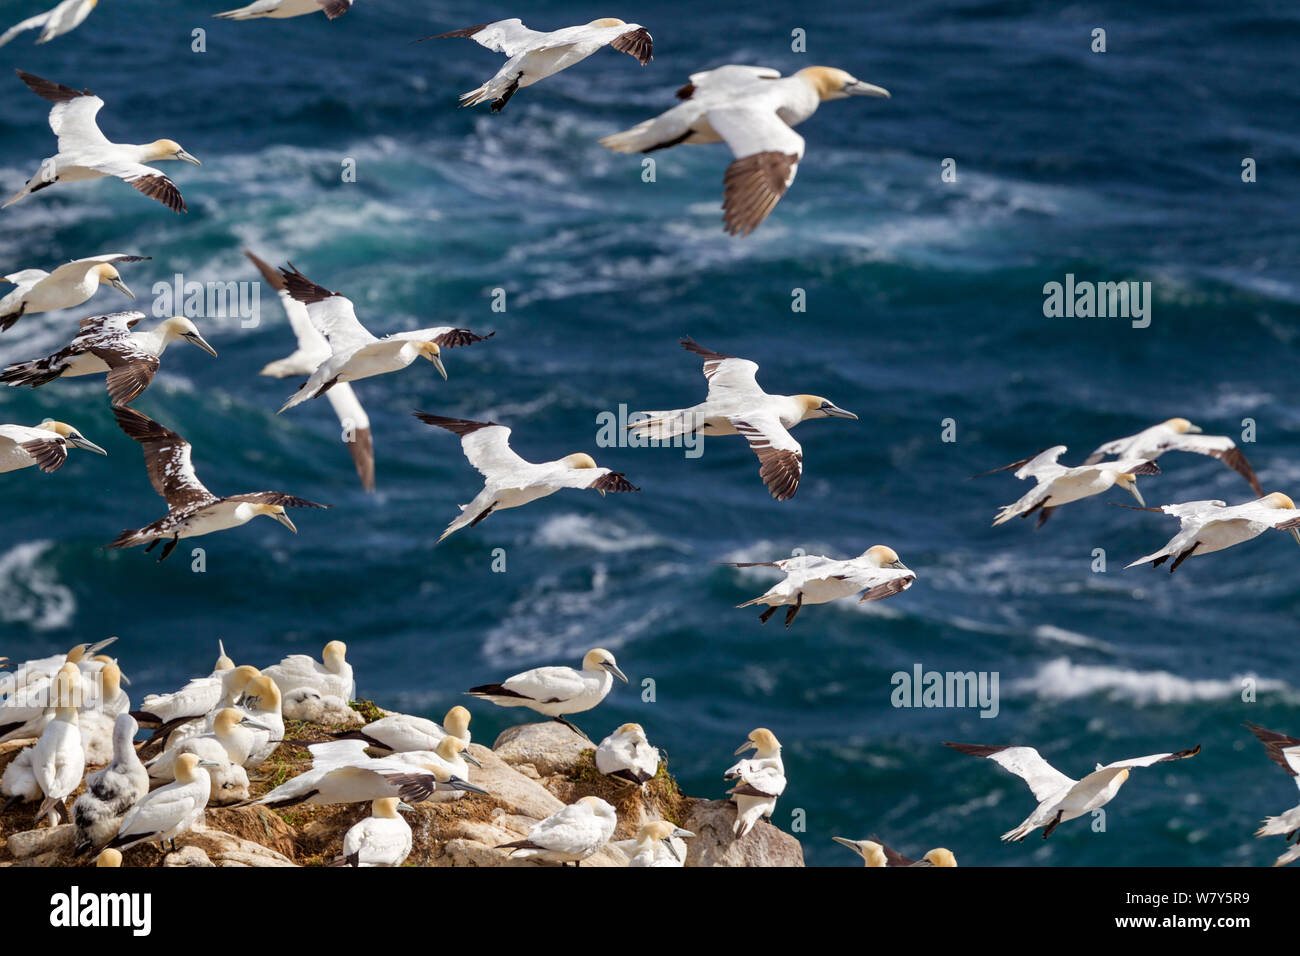 Northern gannets (Morus bassanus) hovering in the air over the breeding colony. Most are adults, but the mottled birds to the middle left are immature birds. Great Saltee, County Wexford, Ireland. July. Stock Photo